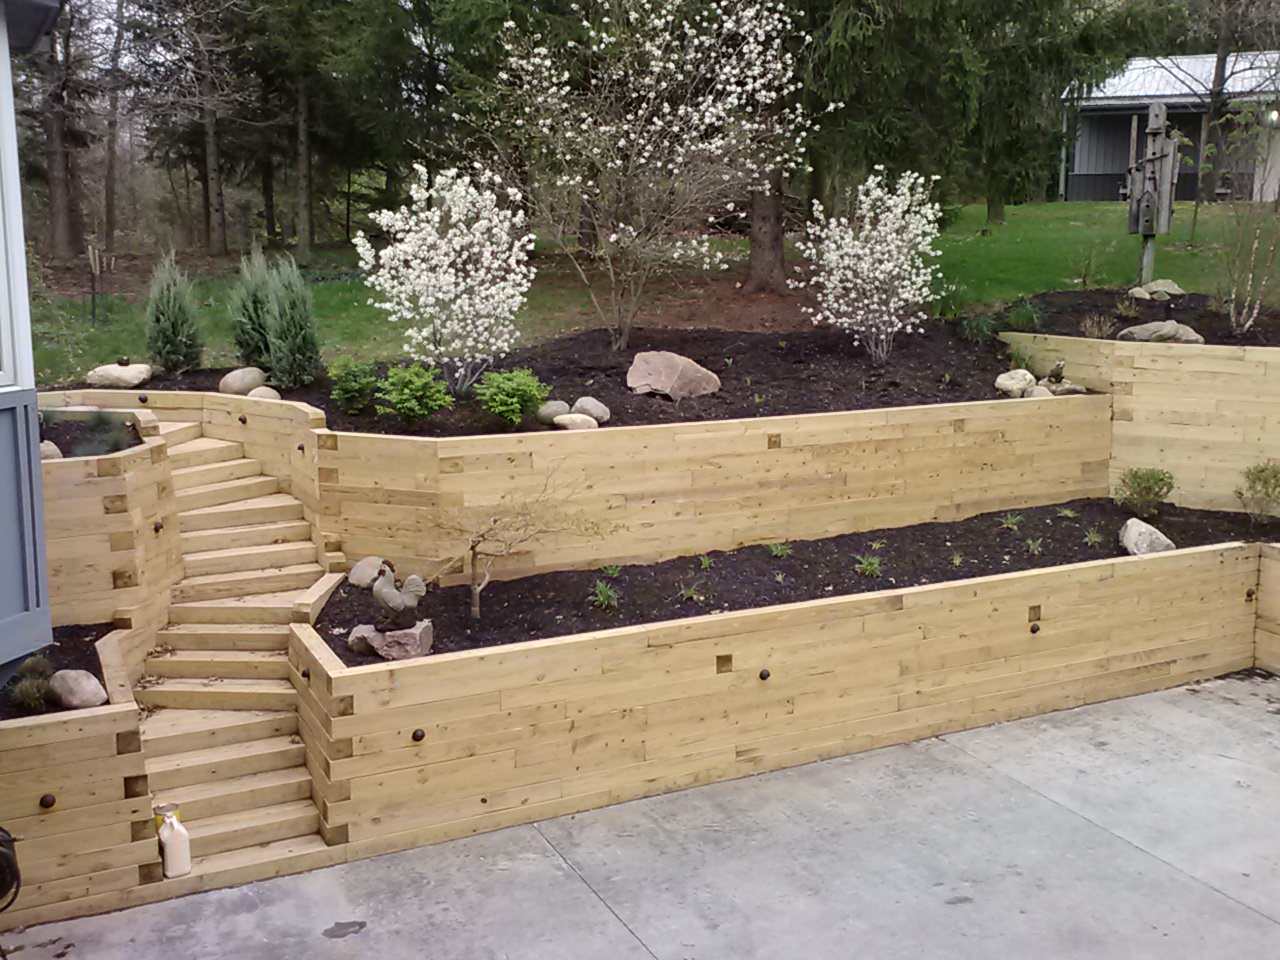 75 Beautiful Retaining Wall Design With Decking Houzz Pictures Ideas April 2021 Houzz